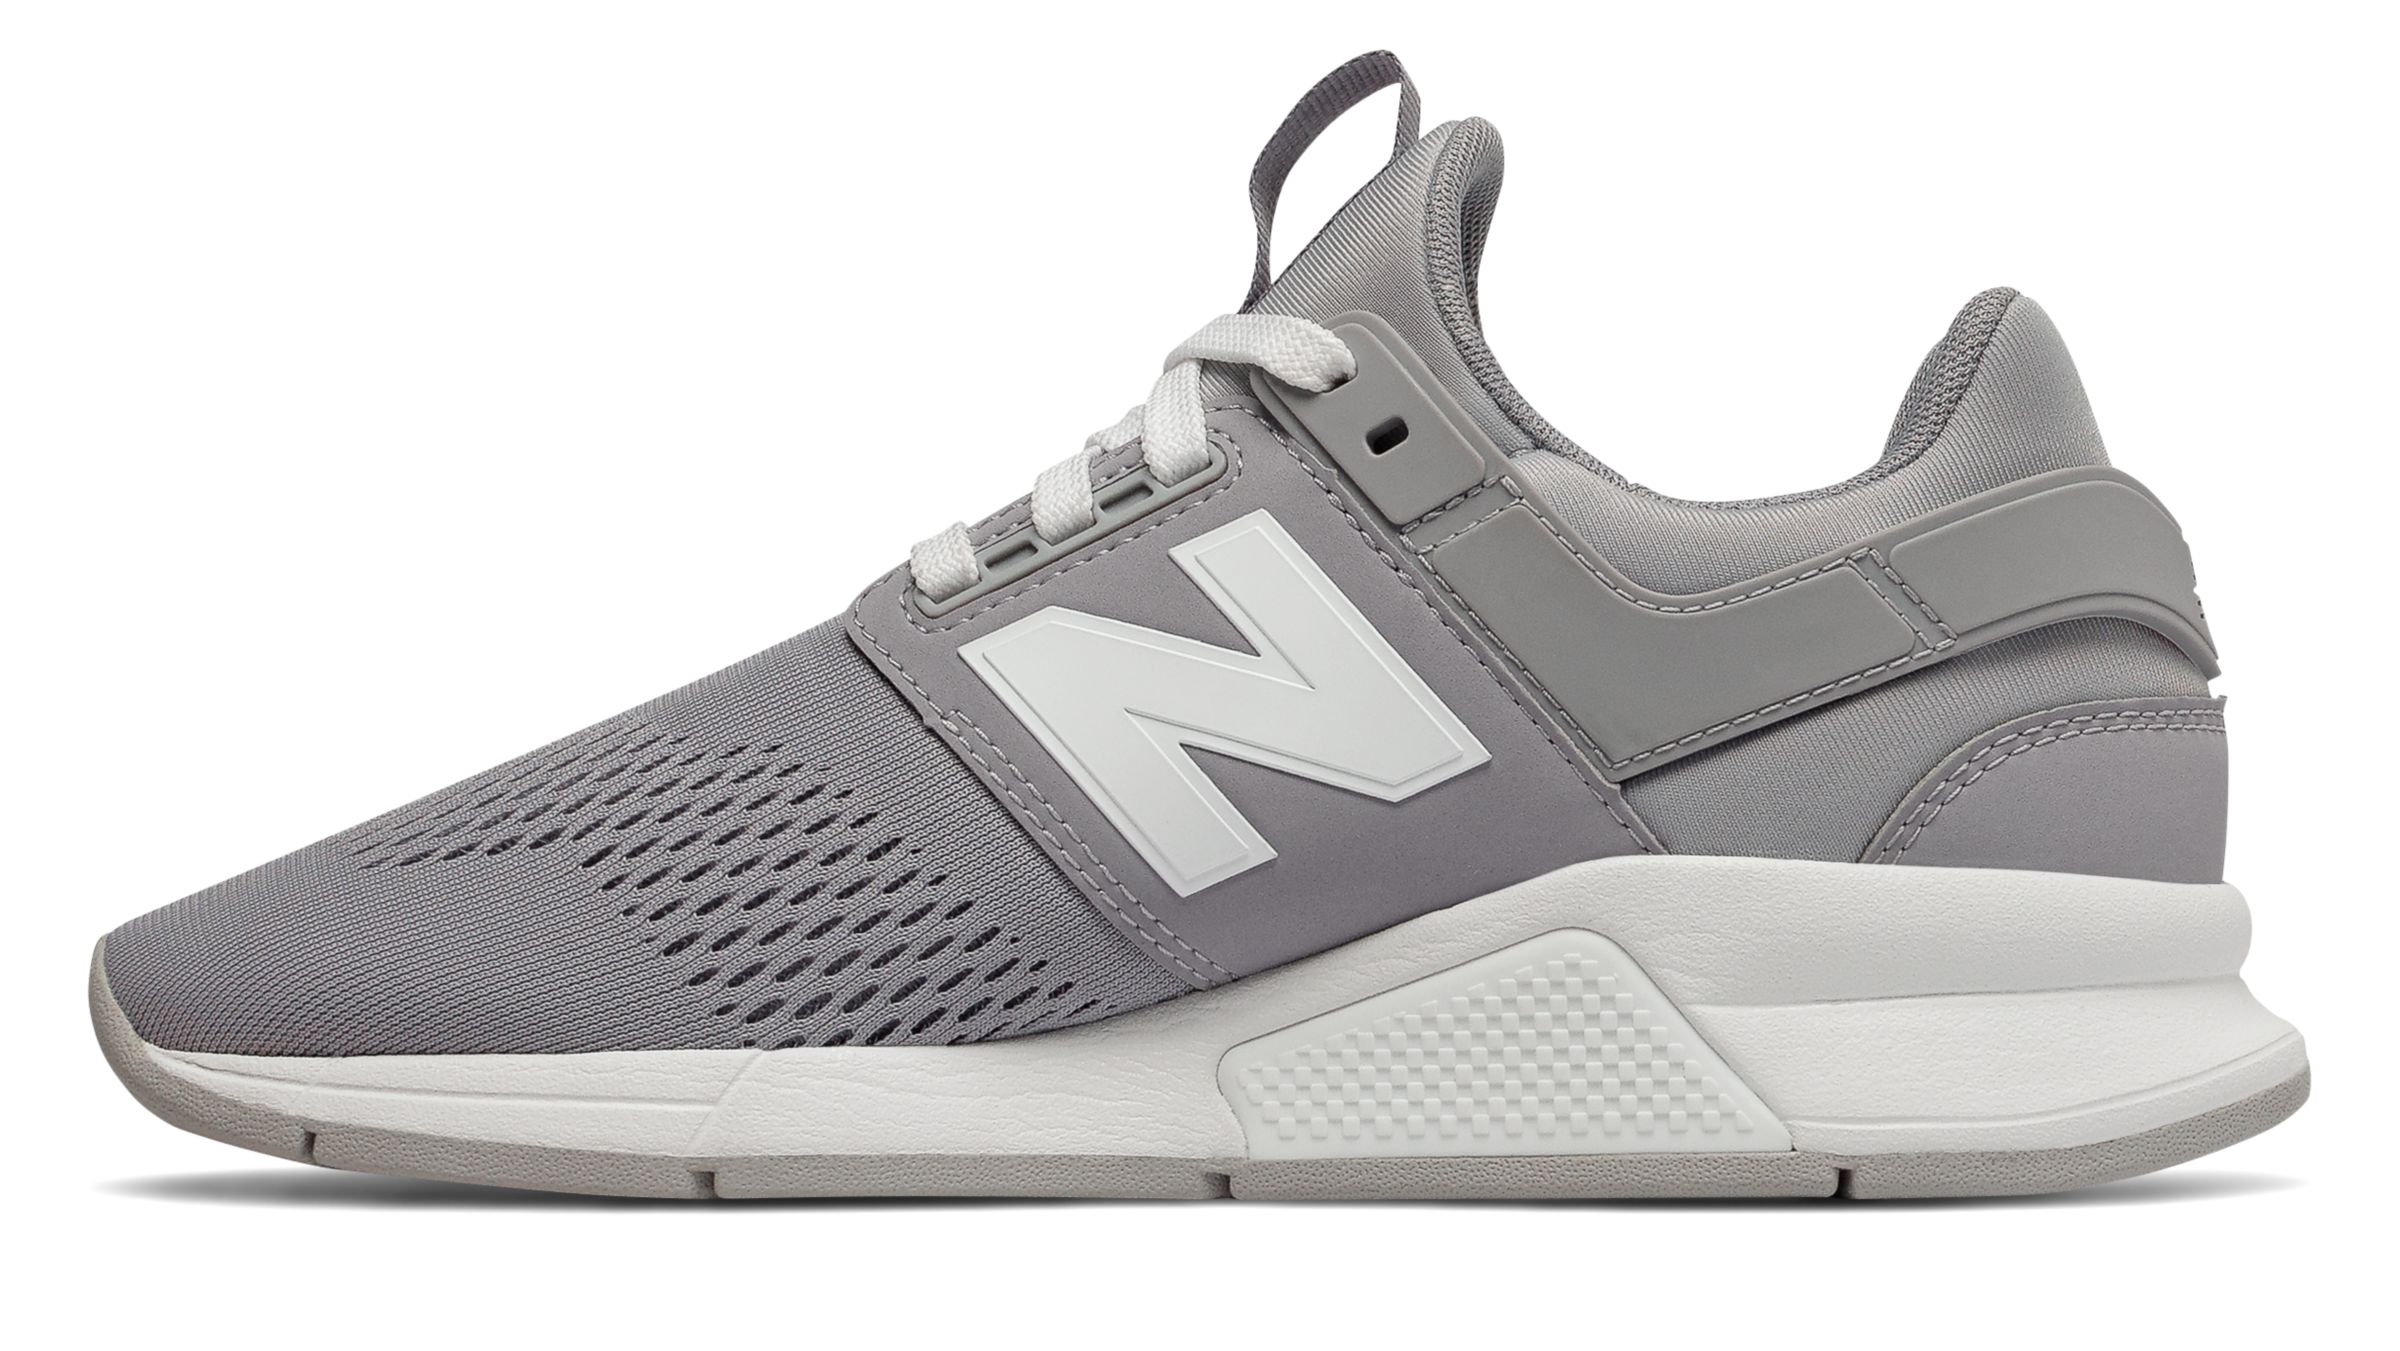 New Balance WS247-V2C on Sale - Discounts Up to 40% Off on WS247UE at Joe's  New Balance Outlet